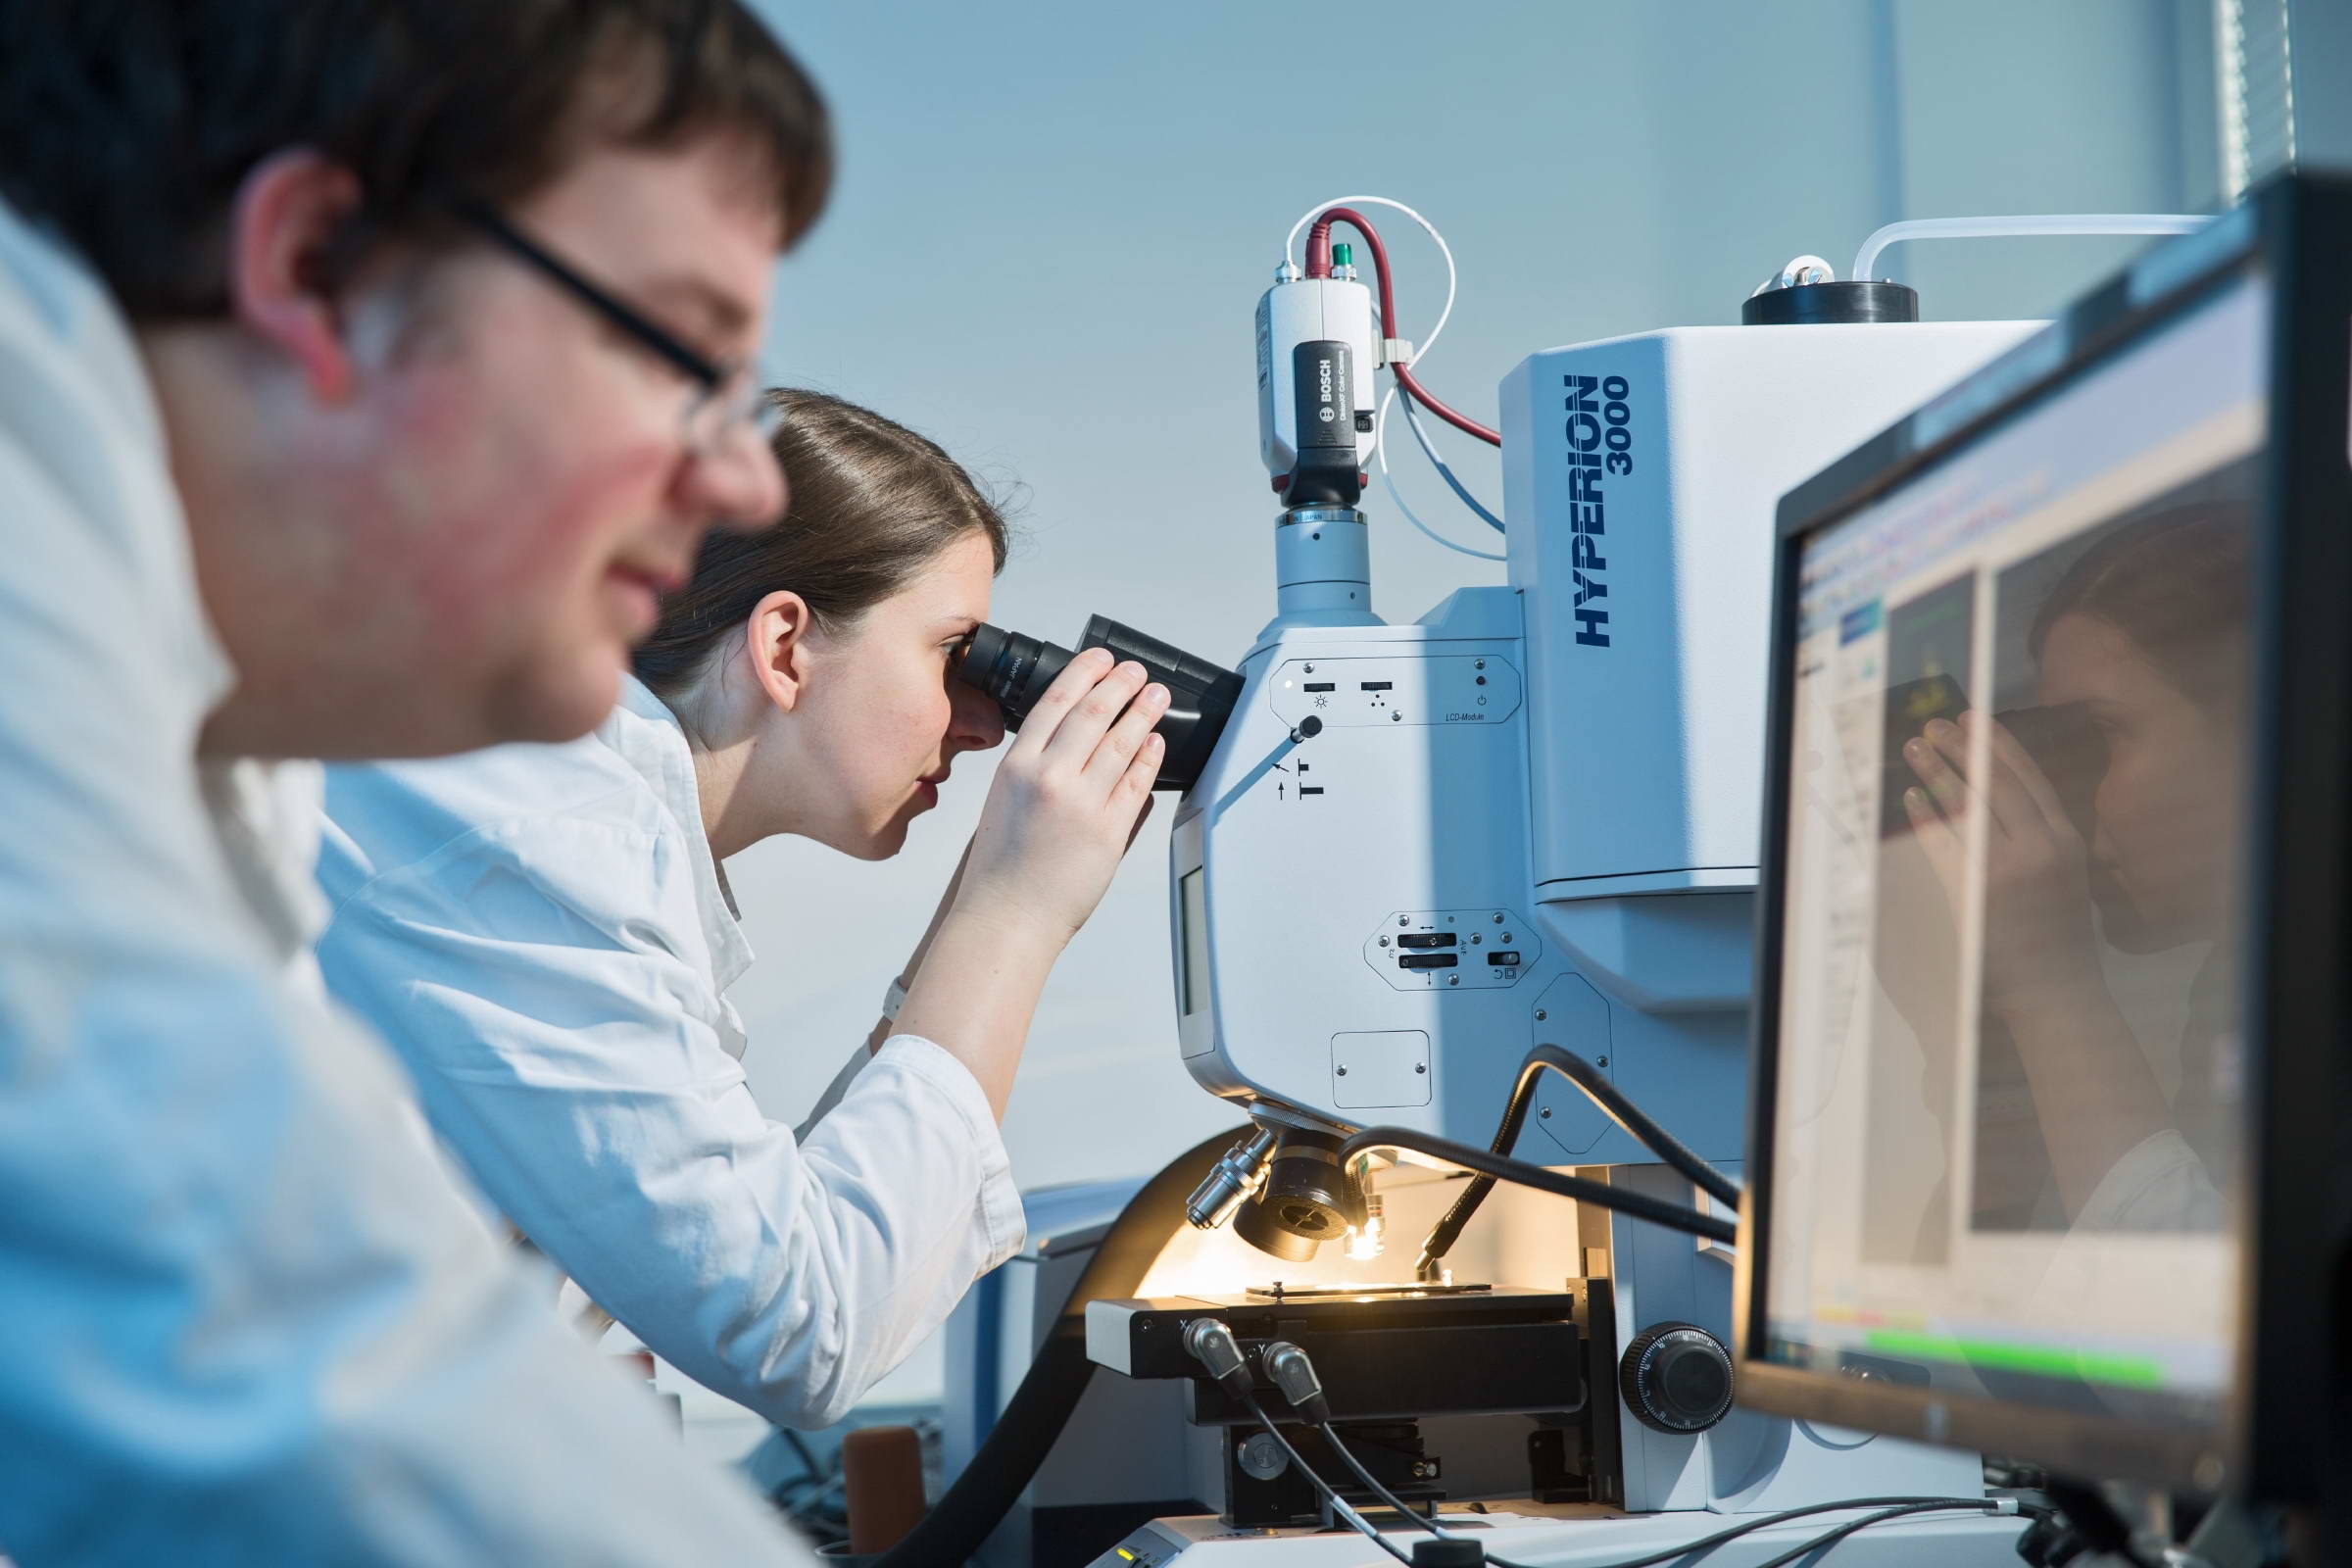 AWI employees are analysing a sea water sample for microplastic particles
(c) Tristan Vankann